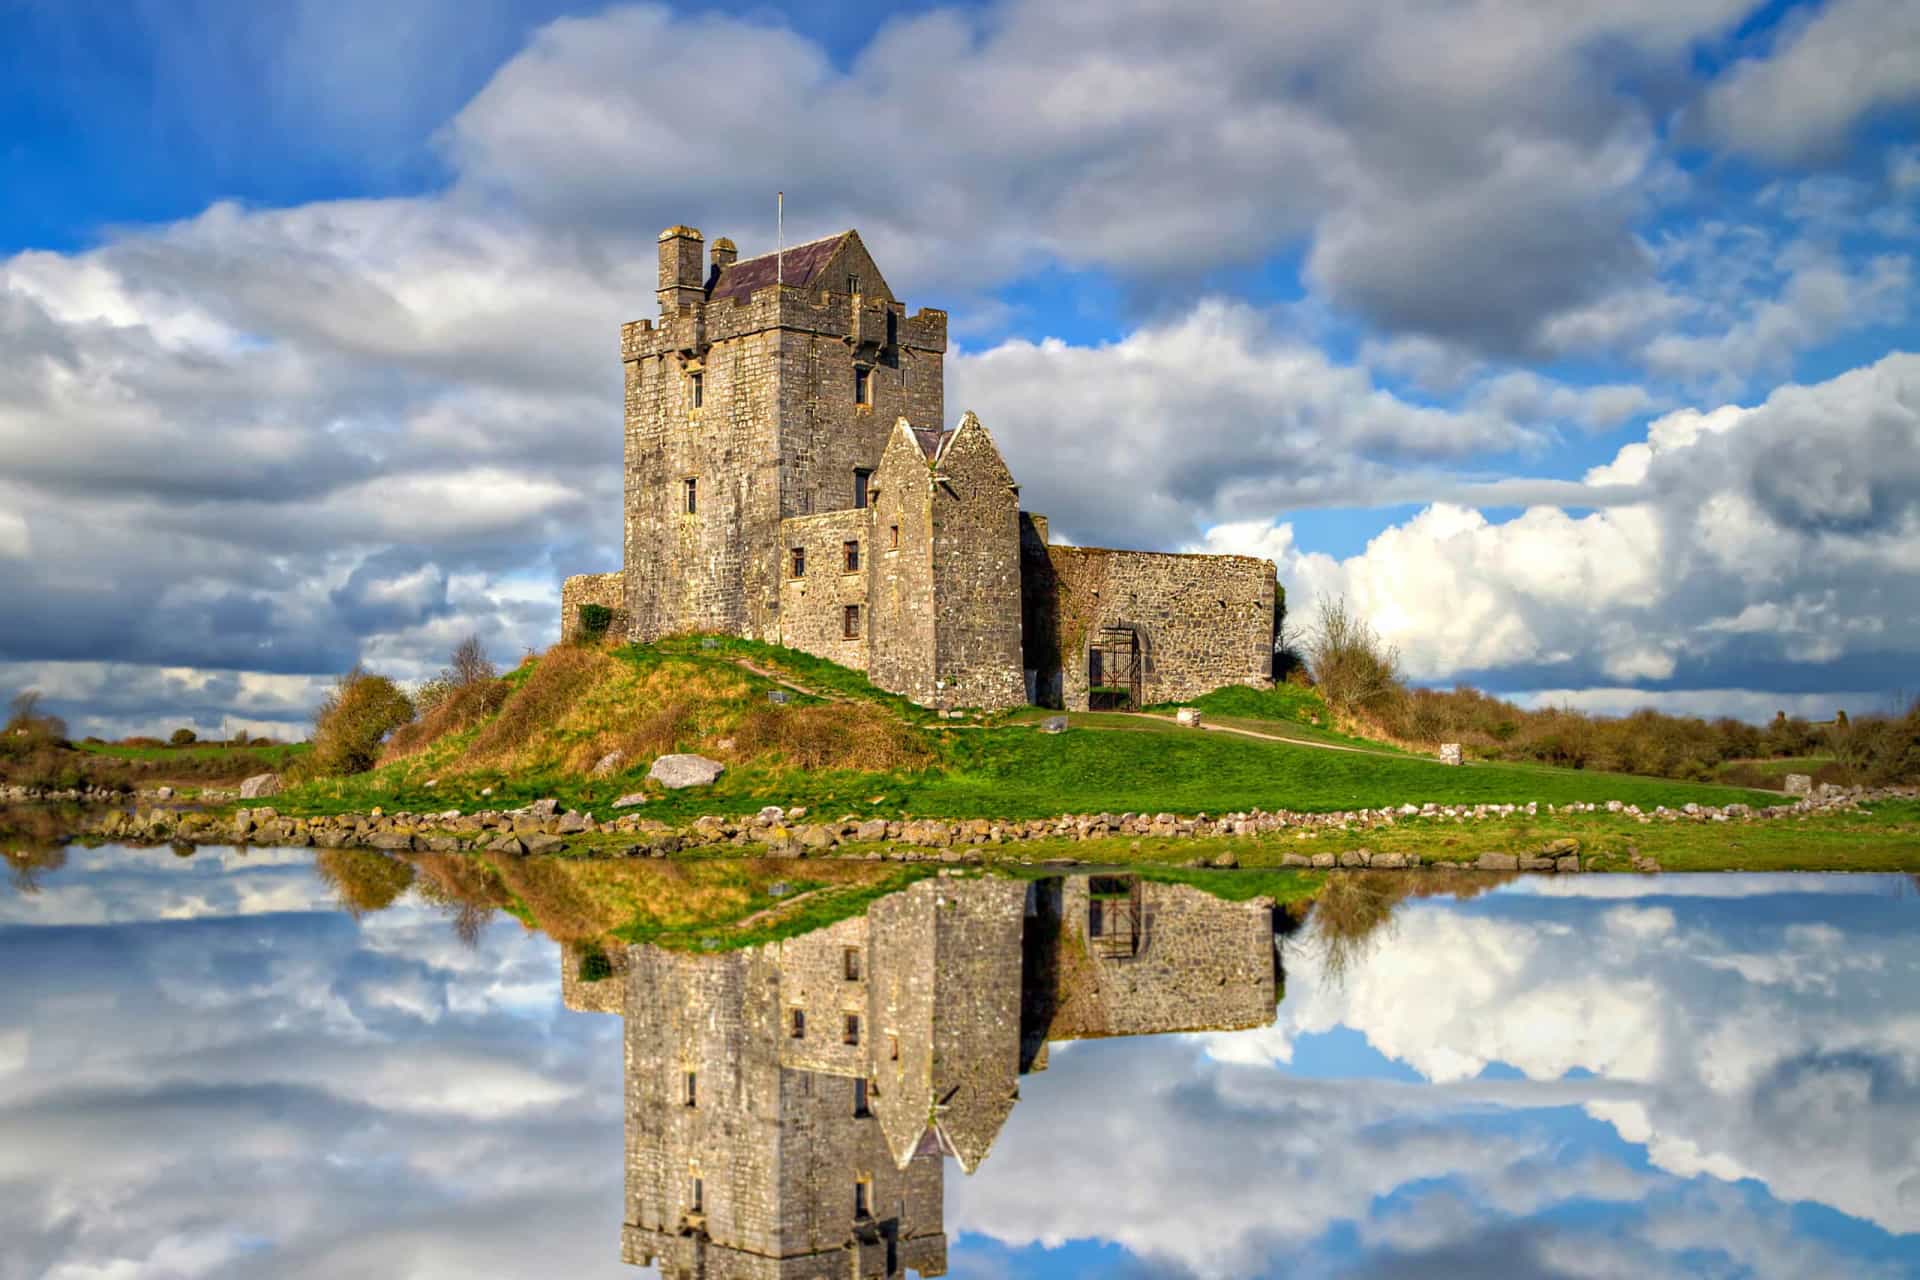 <p>Ireland is peppered with dozens of old castles and forts, and at Kinvara it's Dunguaire Castle that takes the honors. It stands as a 16th-century tower house on the southeastern shore of Galway Bay, just a short drive from the village and well worth a diversion to explore.</p>